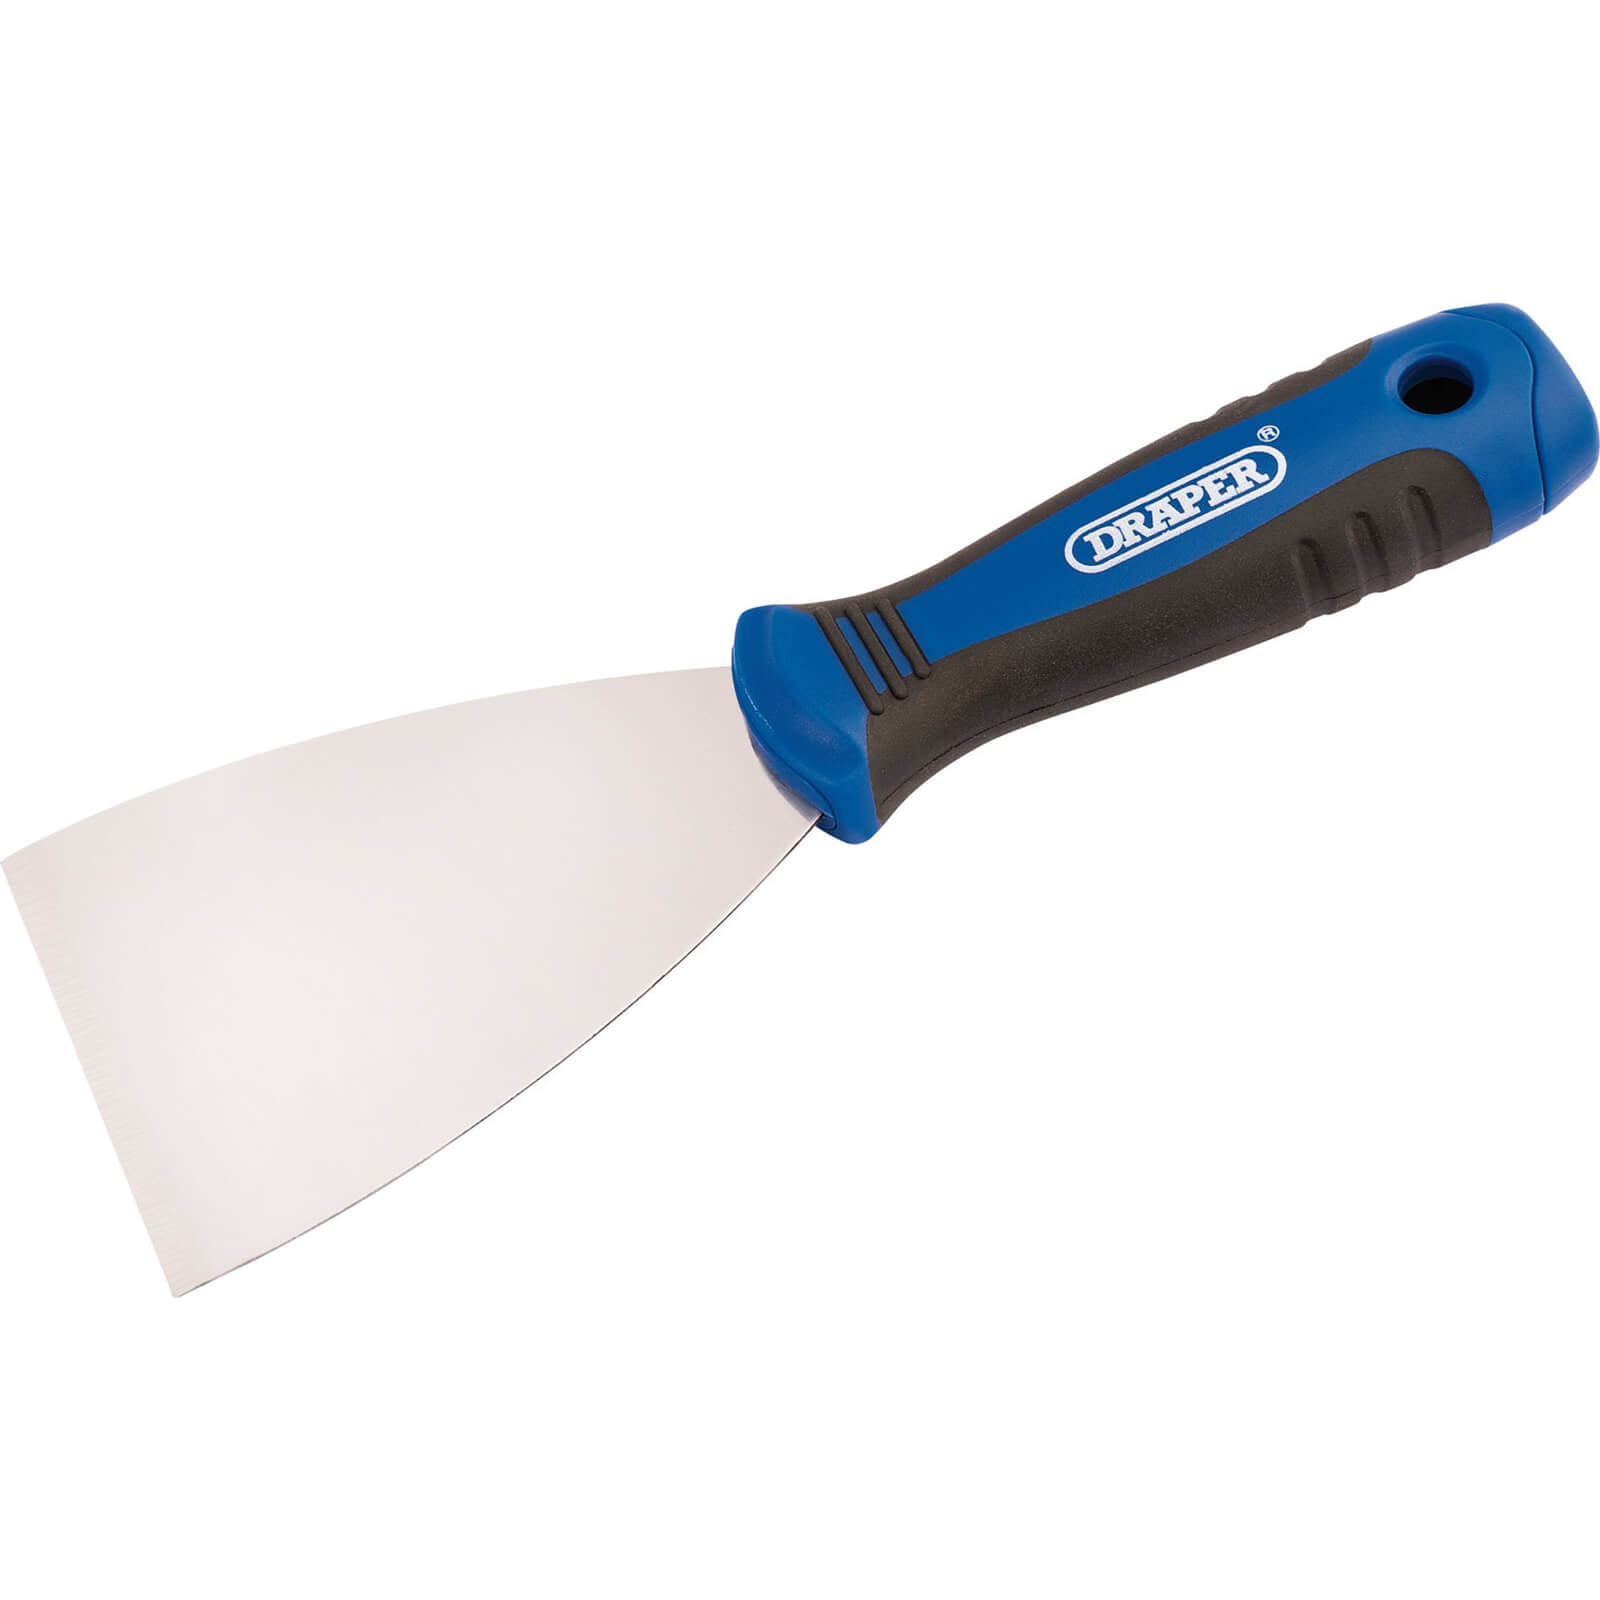 Image of Draper Soft Grip Stripping Knife 75mm